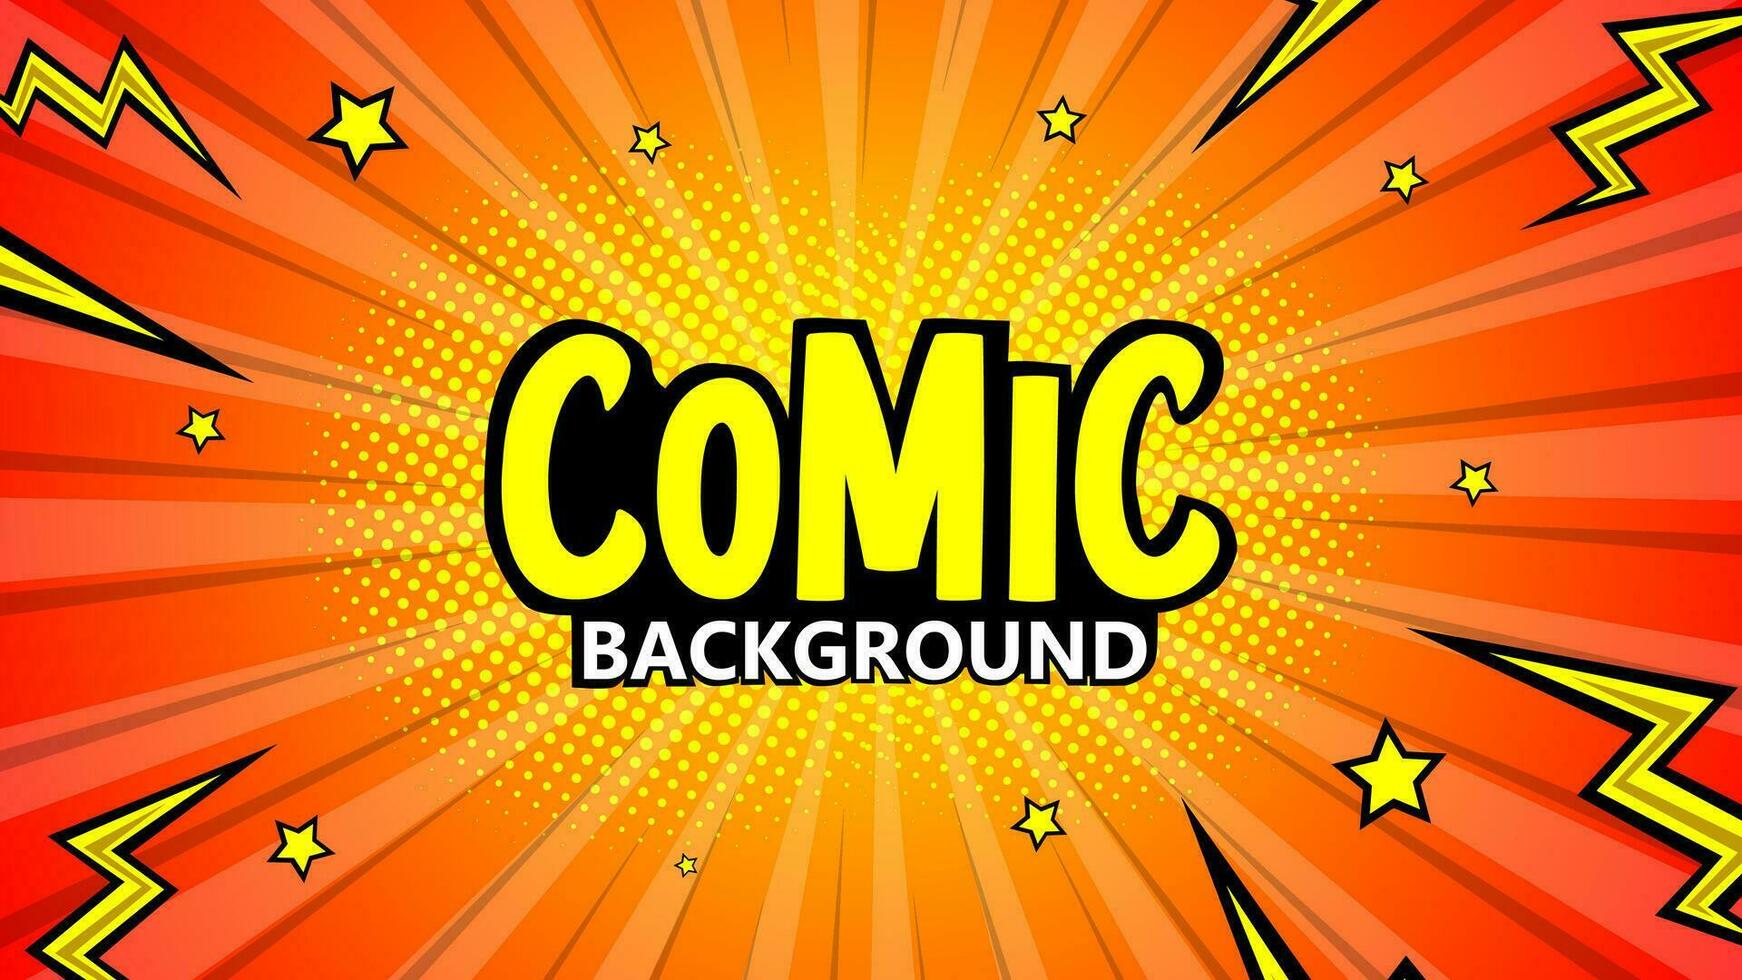 Pop art comic background with halftone colors vector